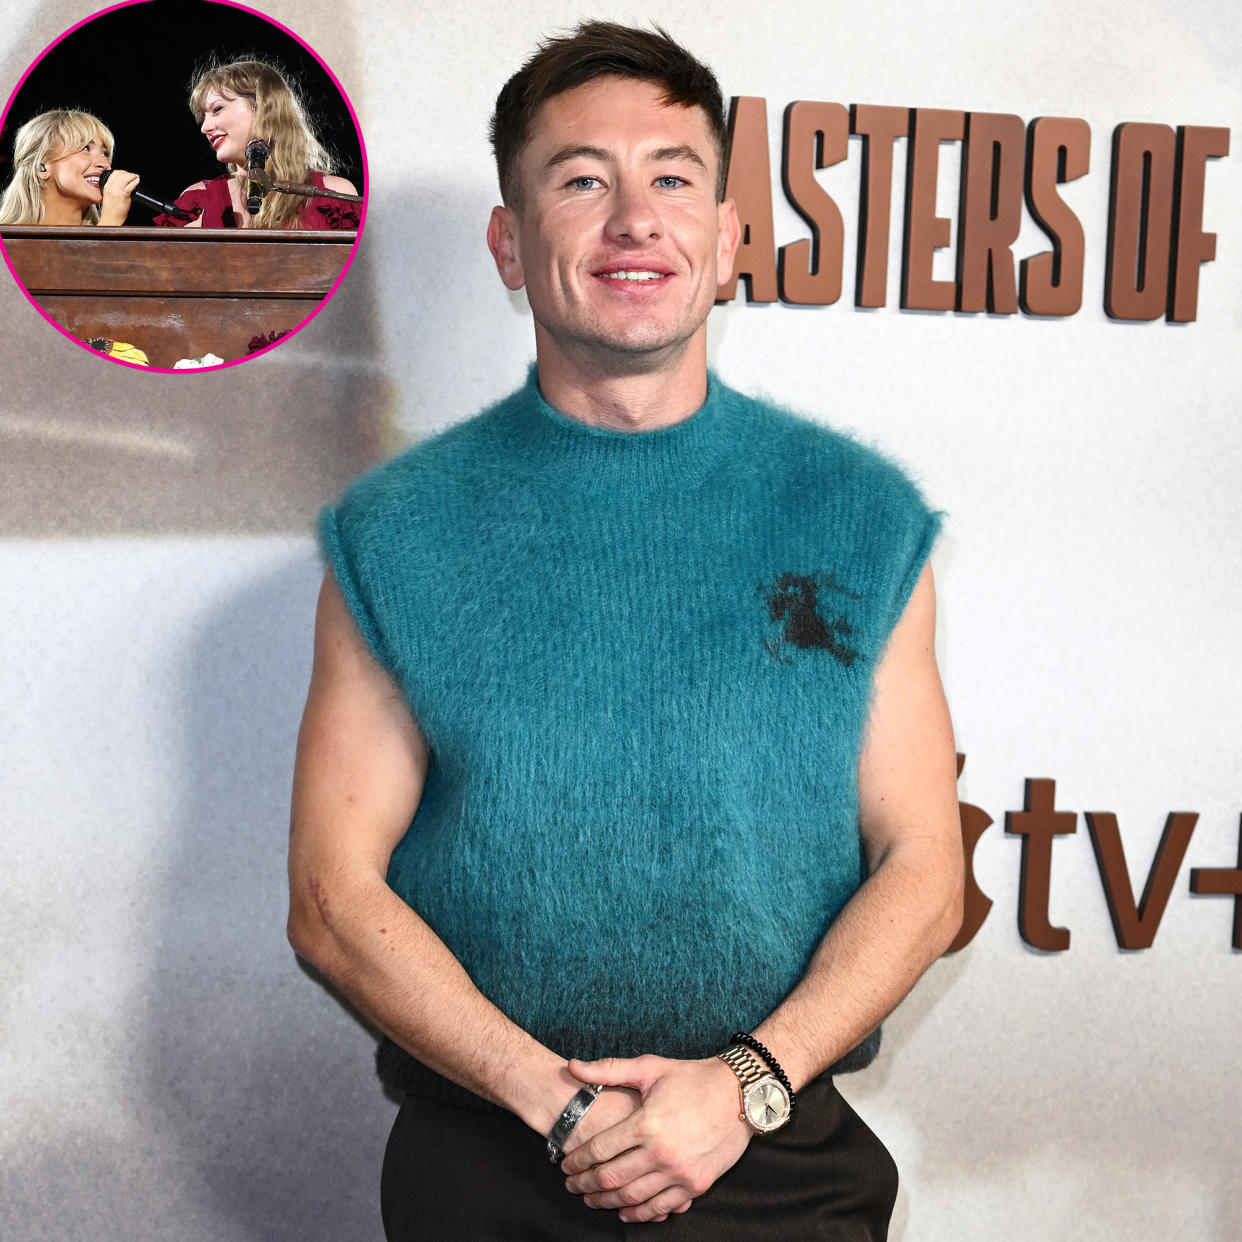 Barry Keoghan’s Reaction to Sabrina Carpenter's Duet With Taylor Swift Further Fuels Romance Rumors